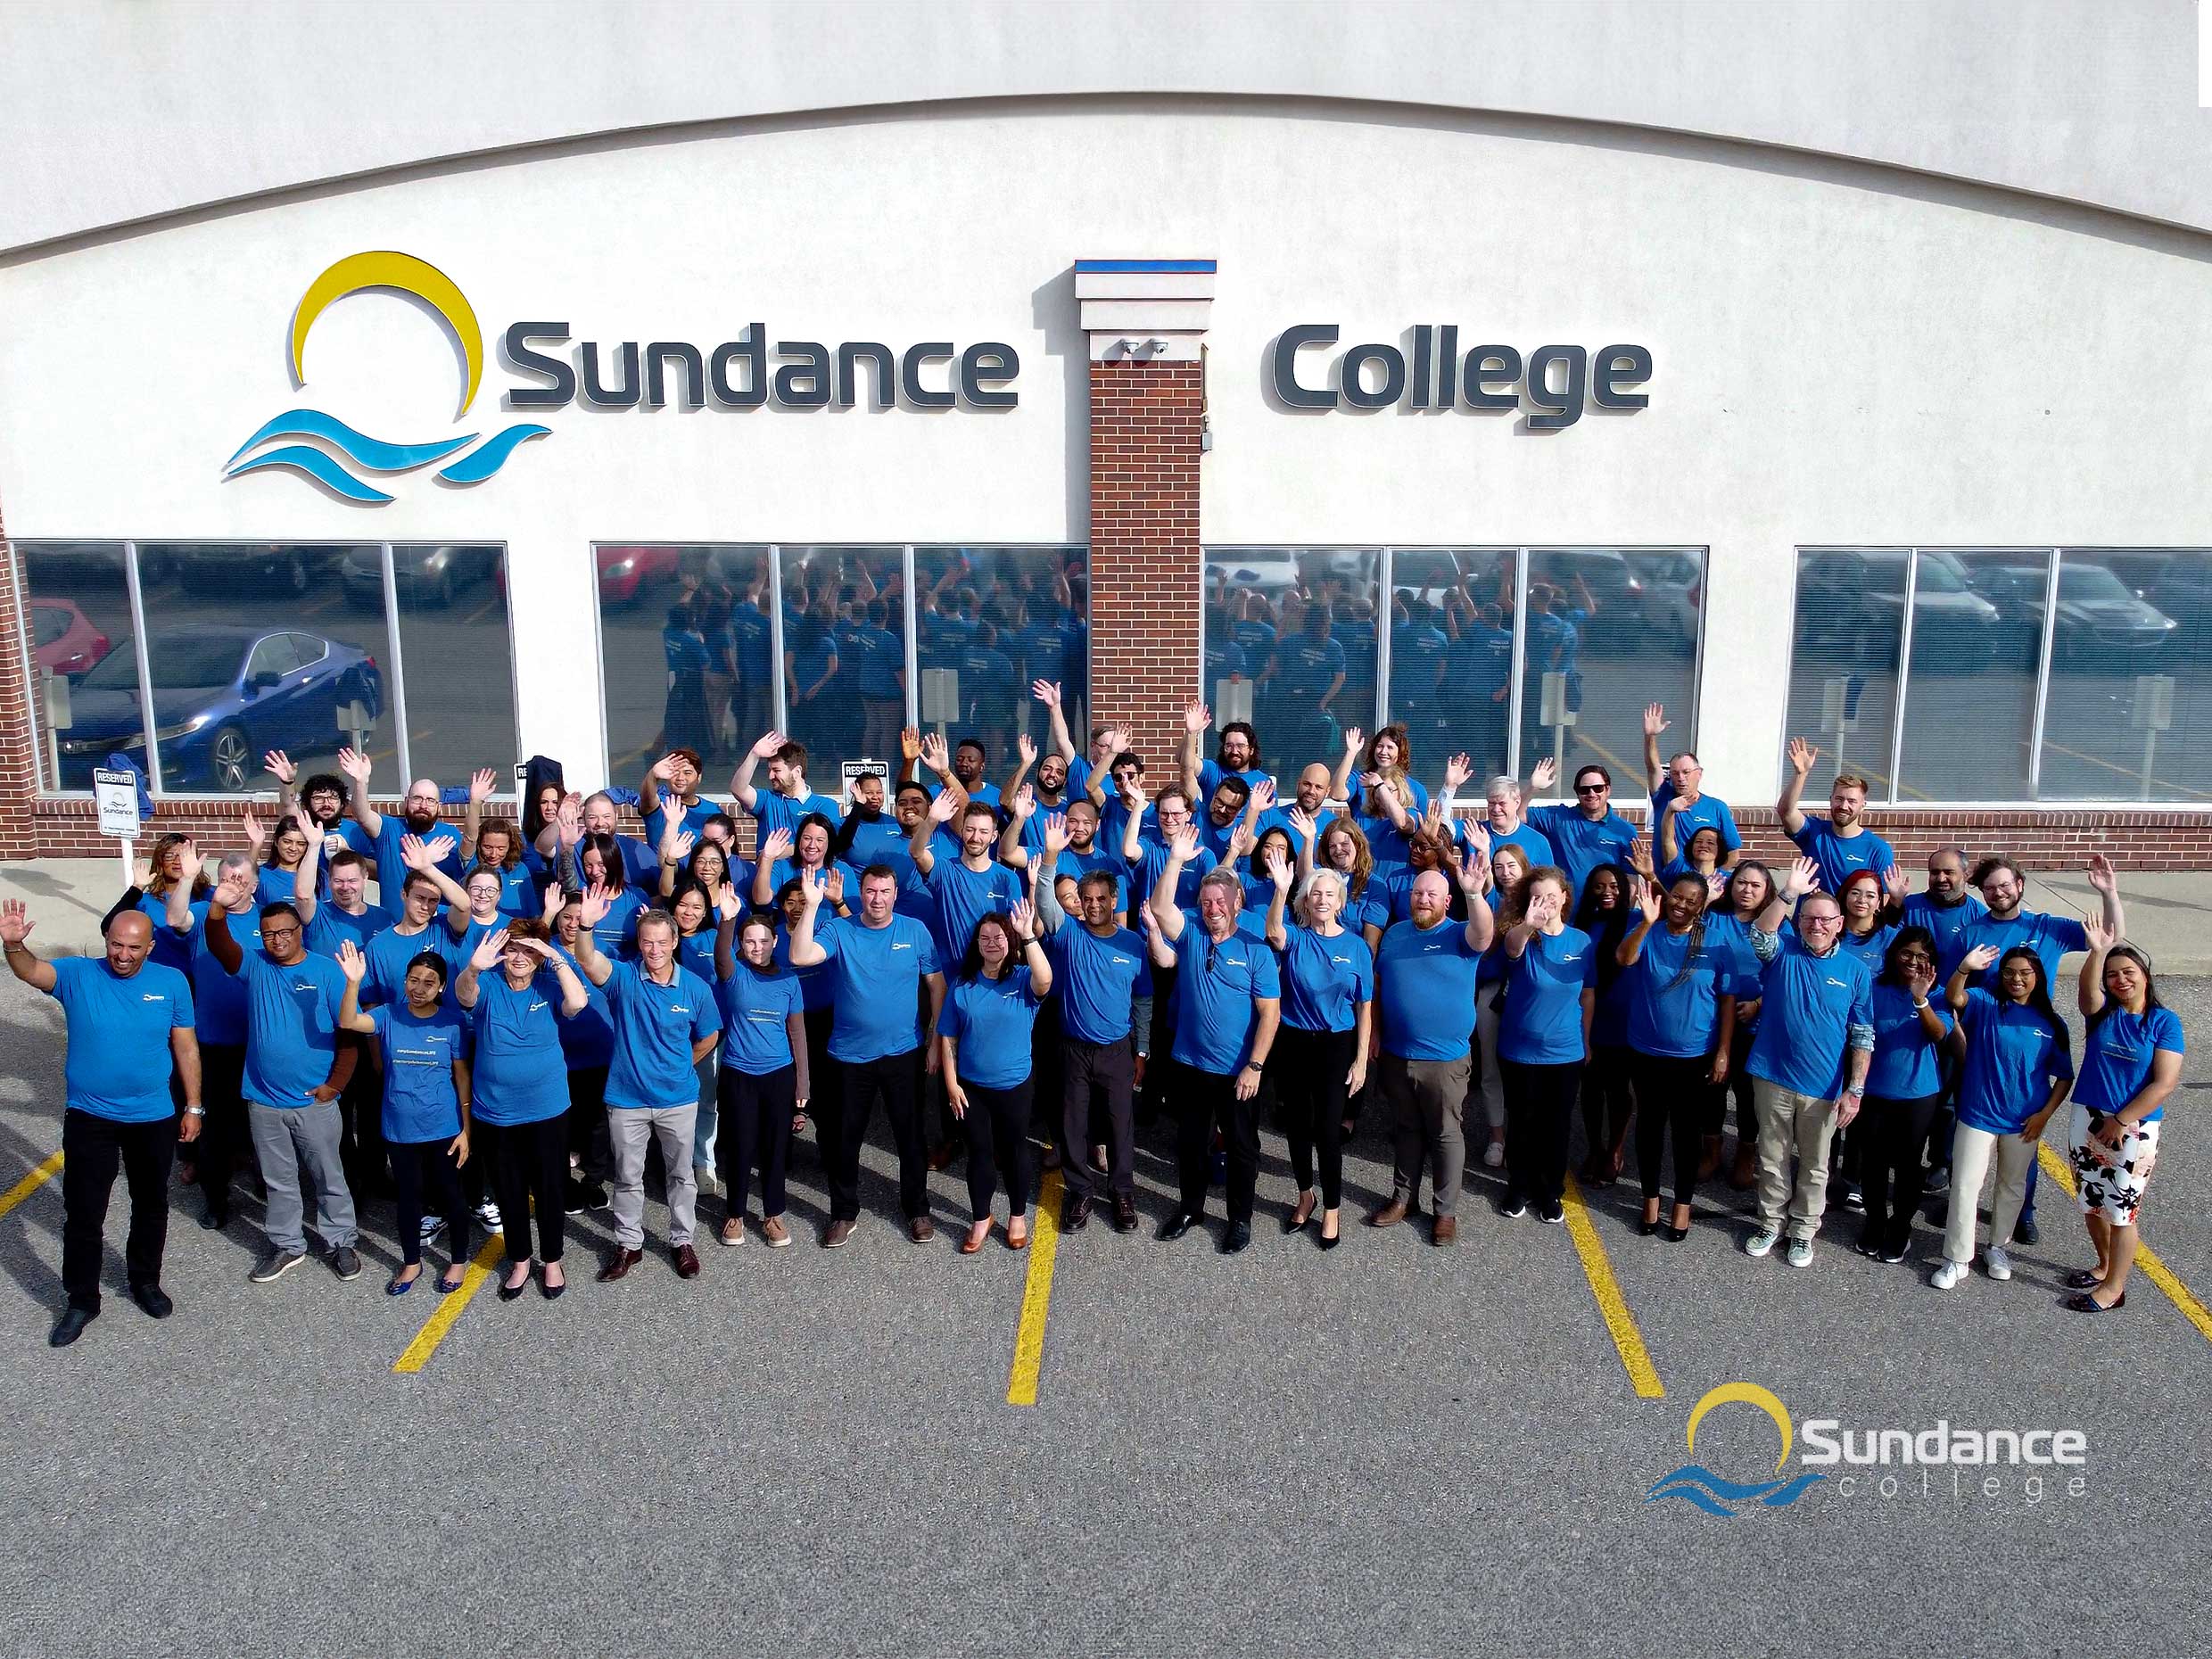 Welcoming and Supportive Community of Sundance College in the Calgary campus.